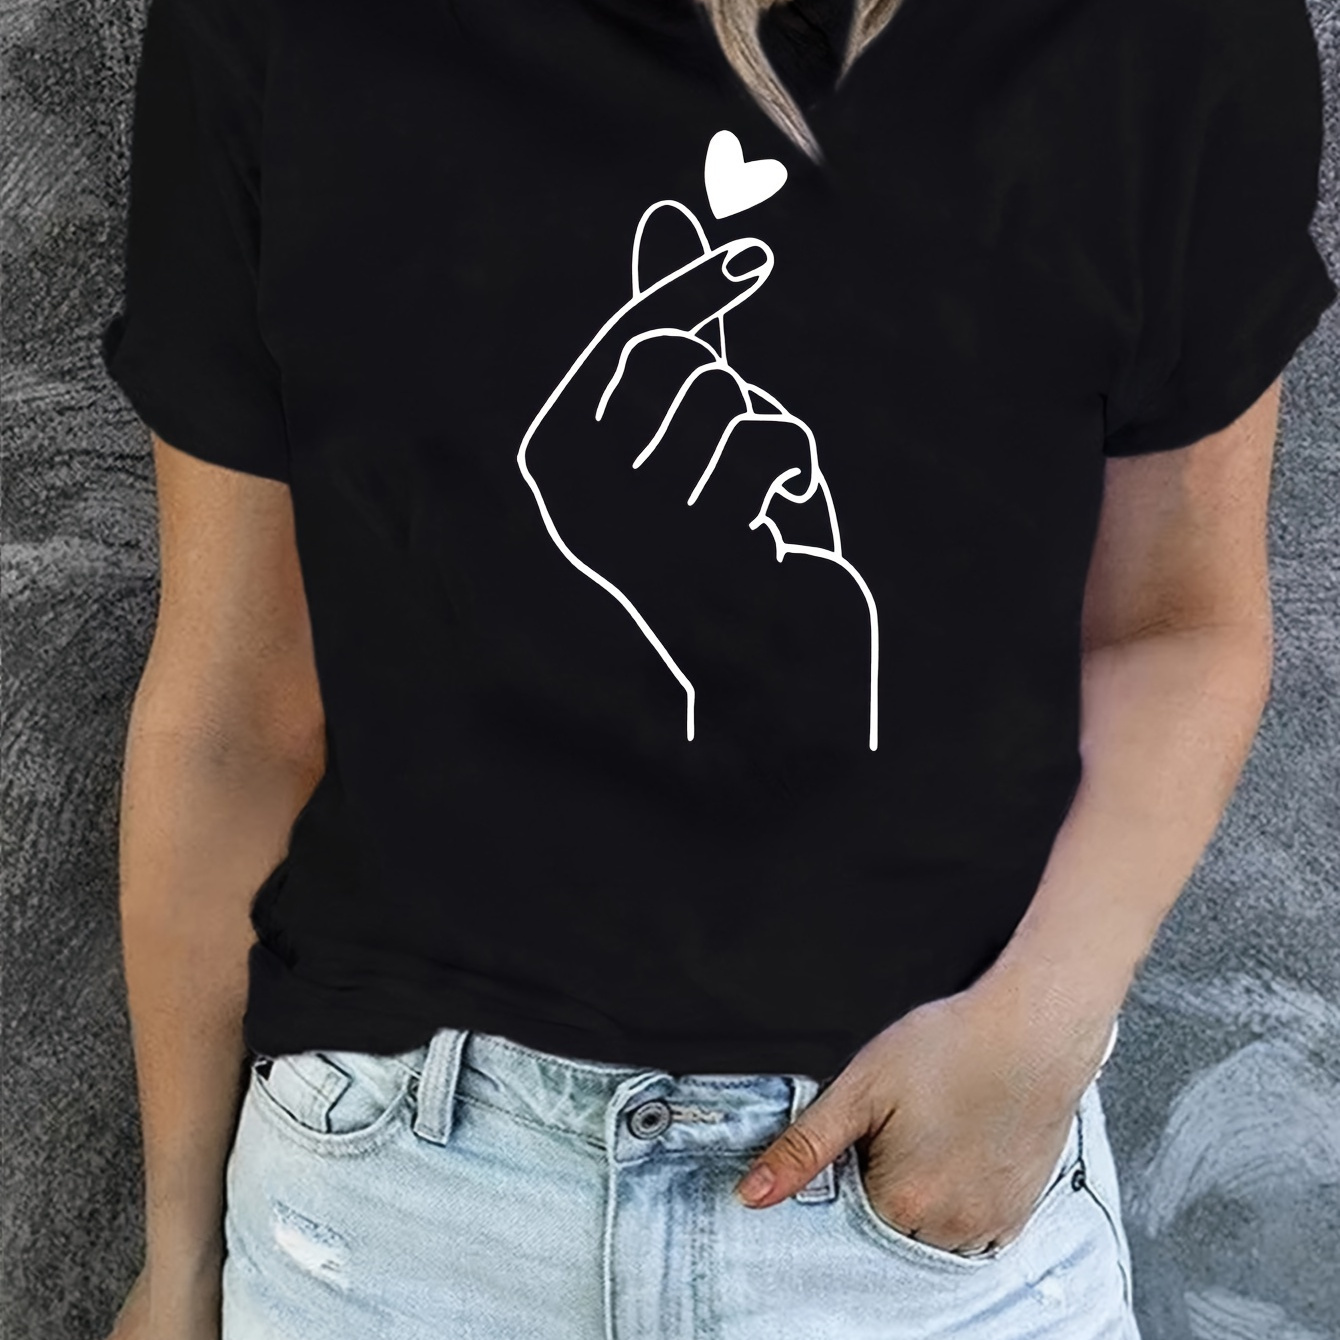 

Gesture Than Heart Print Crew Neck T-shirt, Casual Short Sleeve T-shirt For Spring & Summer, Women's Clothing